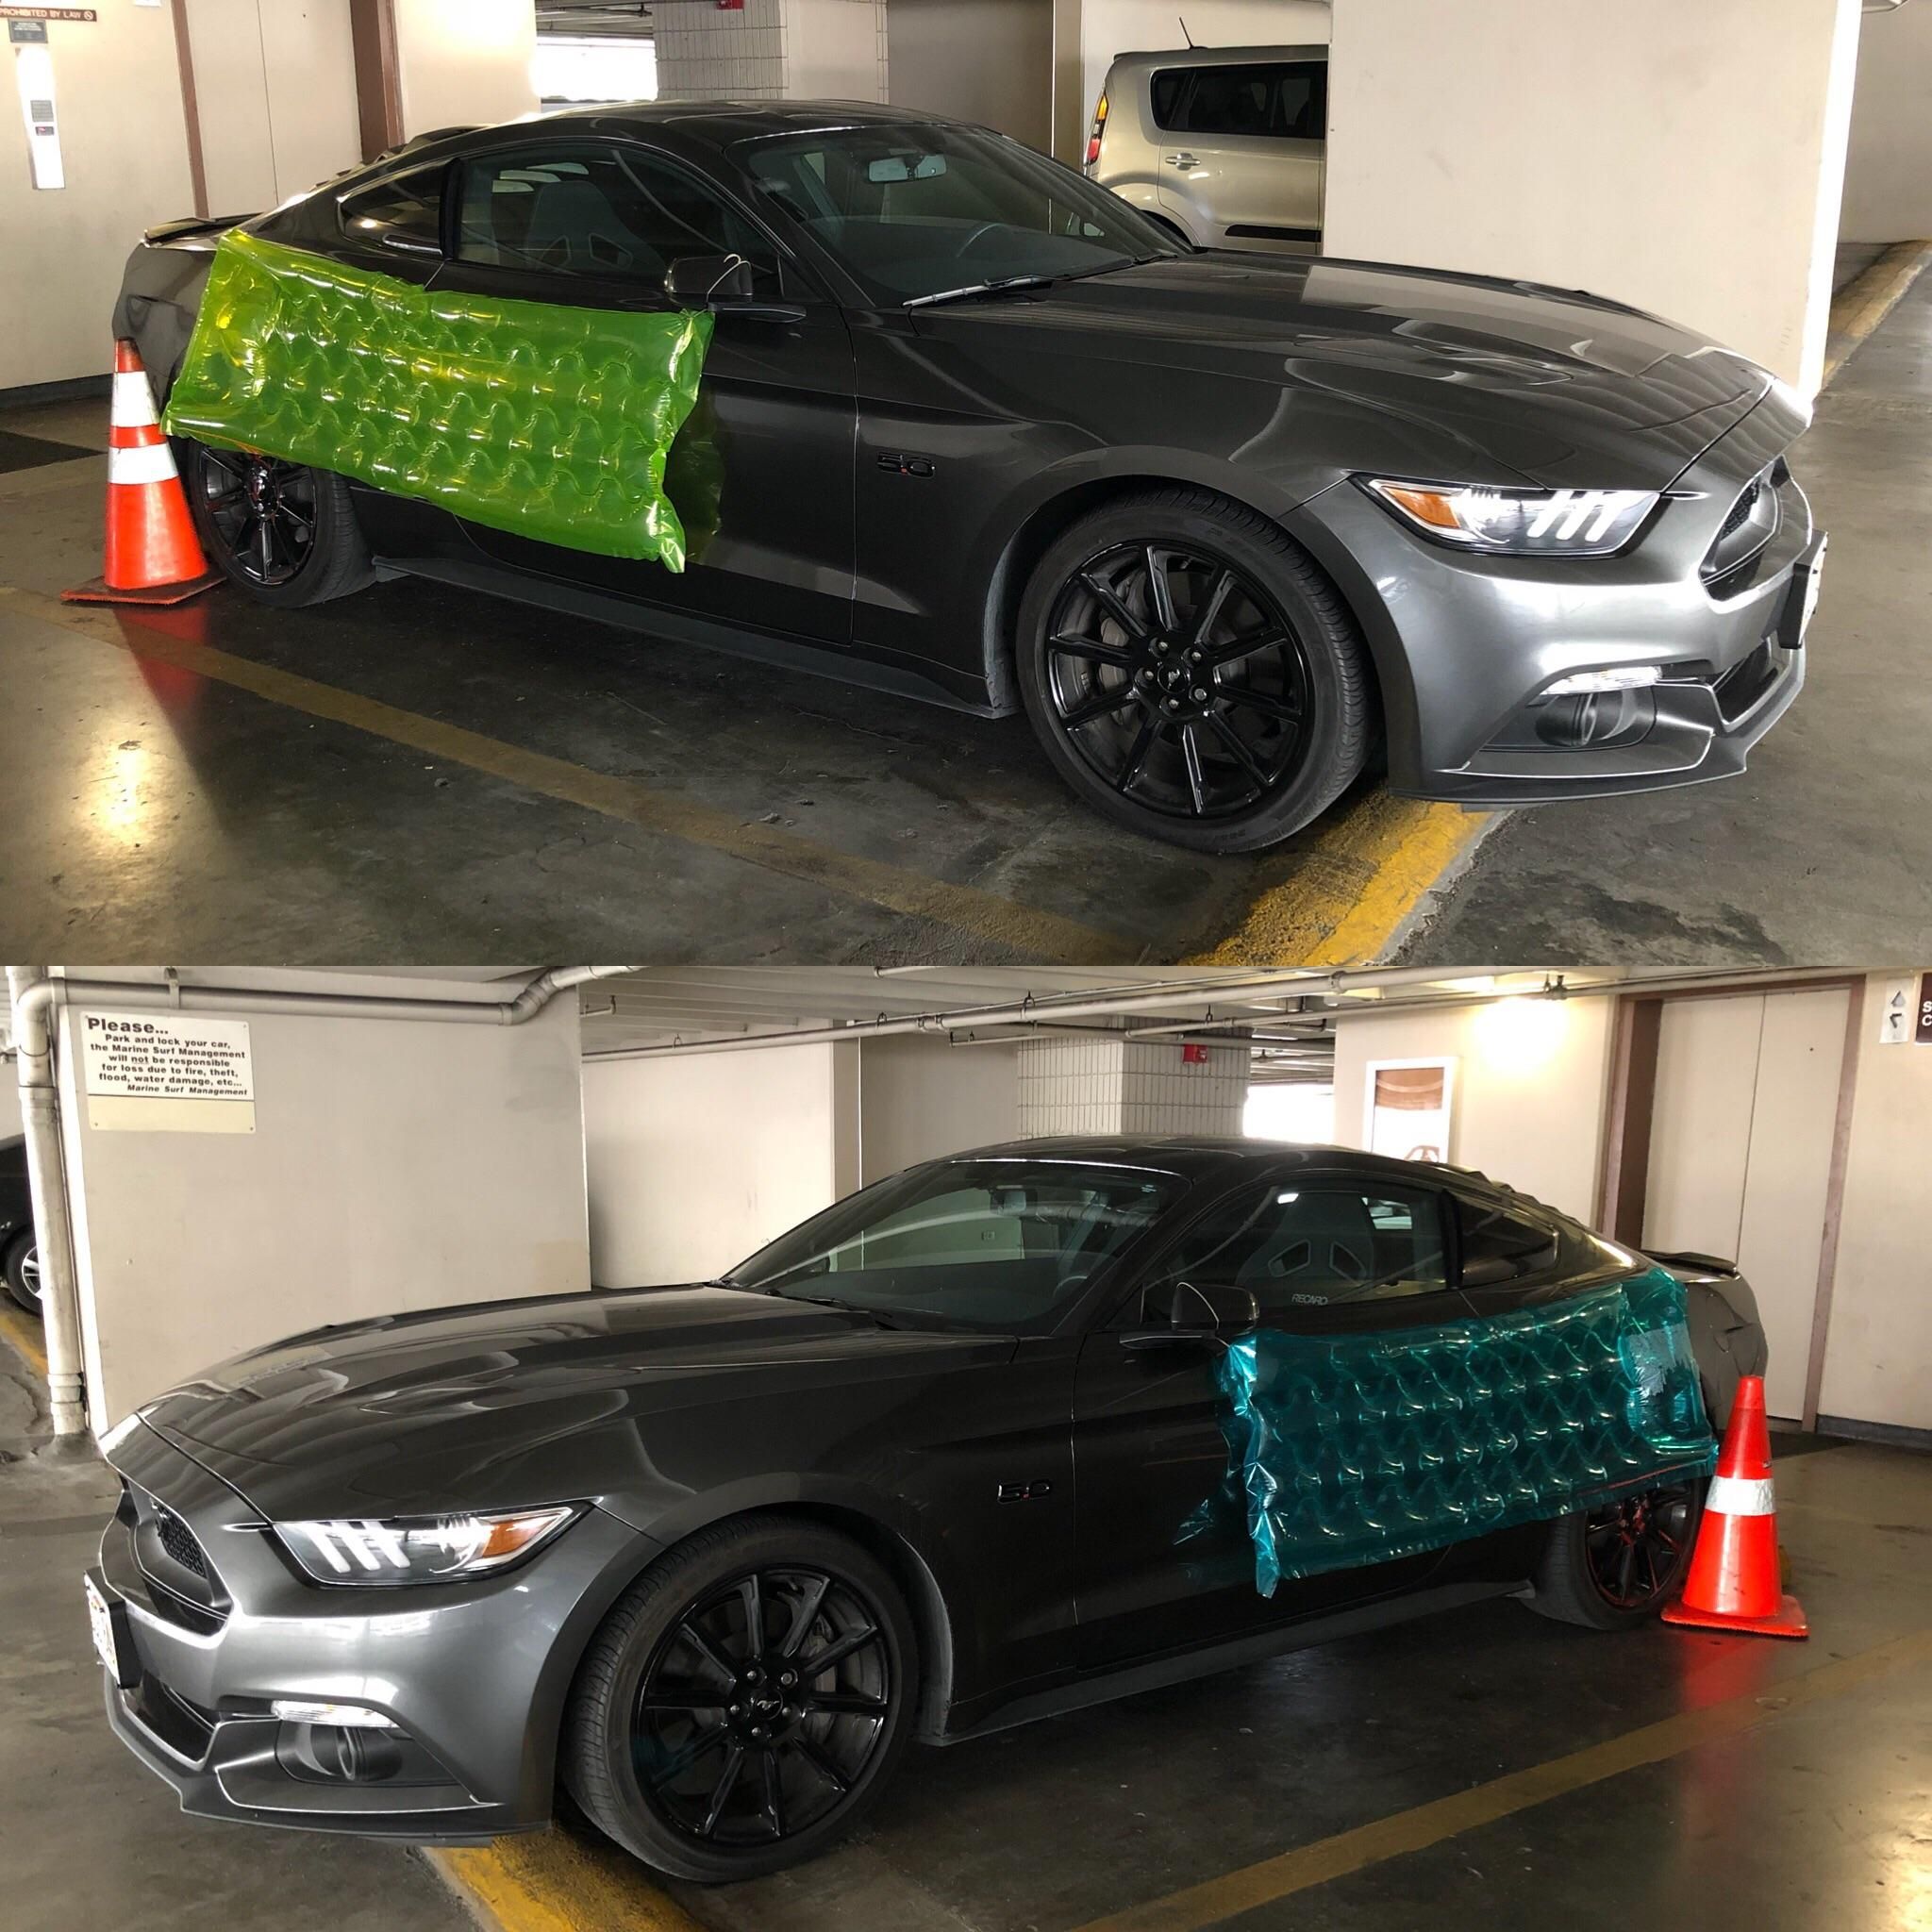 No dents for this guy. The cones are a nice touch.